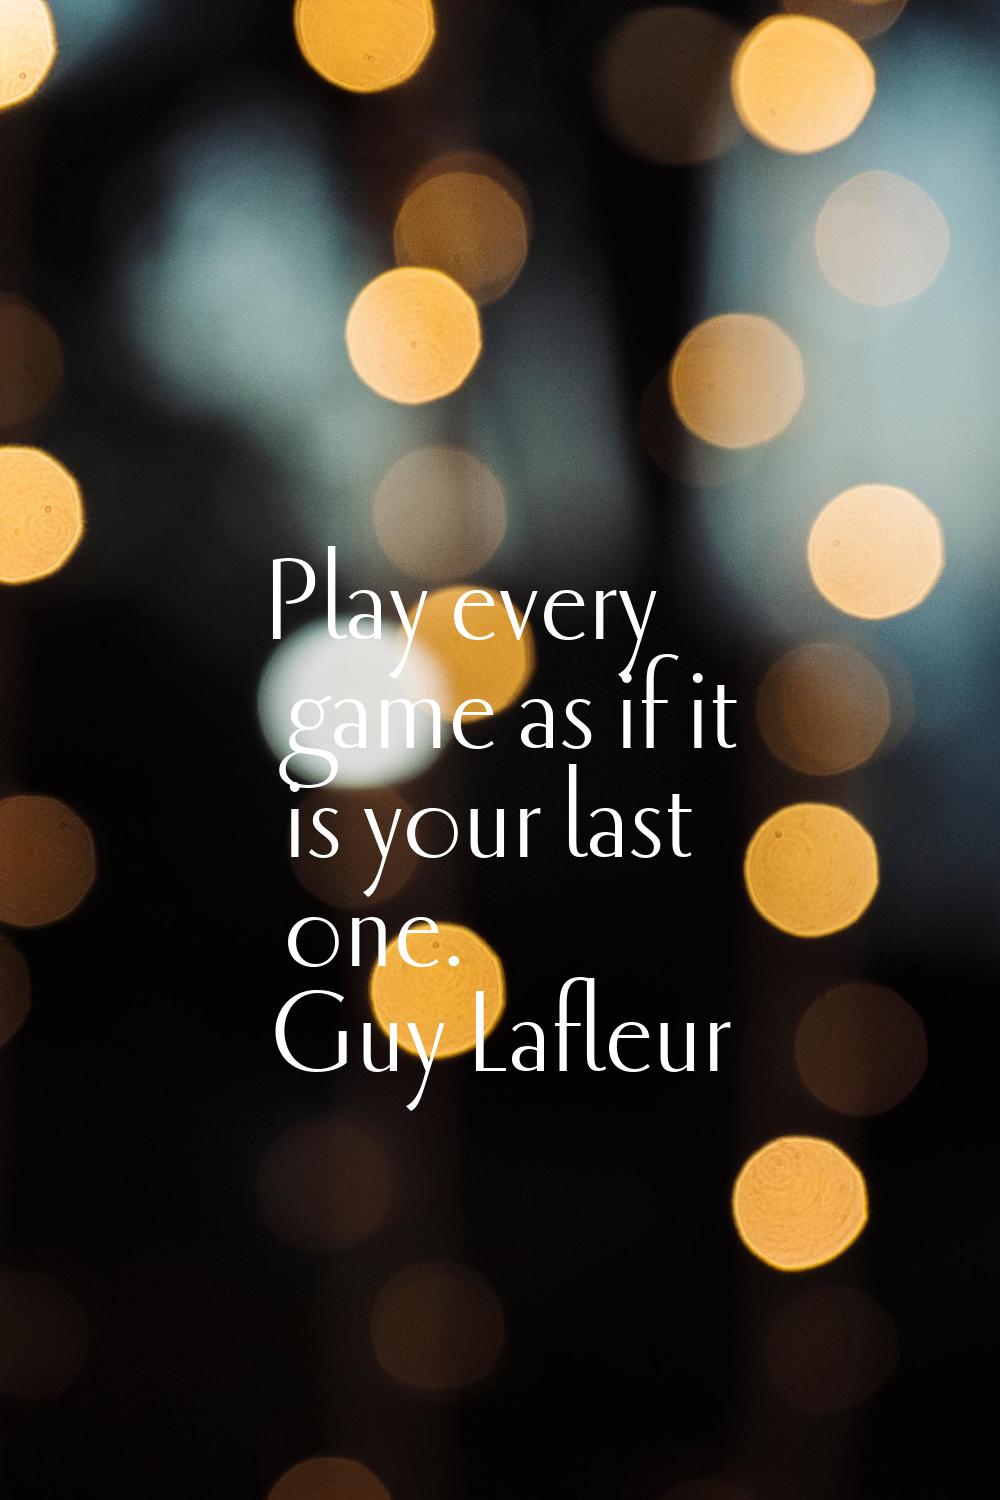 Play every game as if it is your last one.